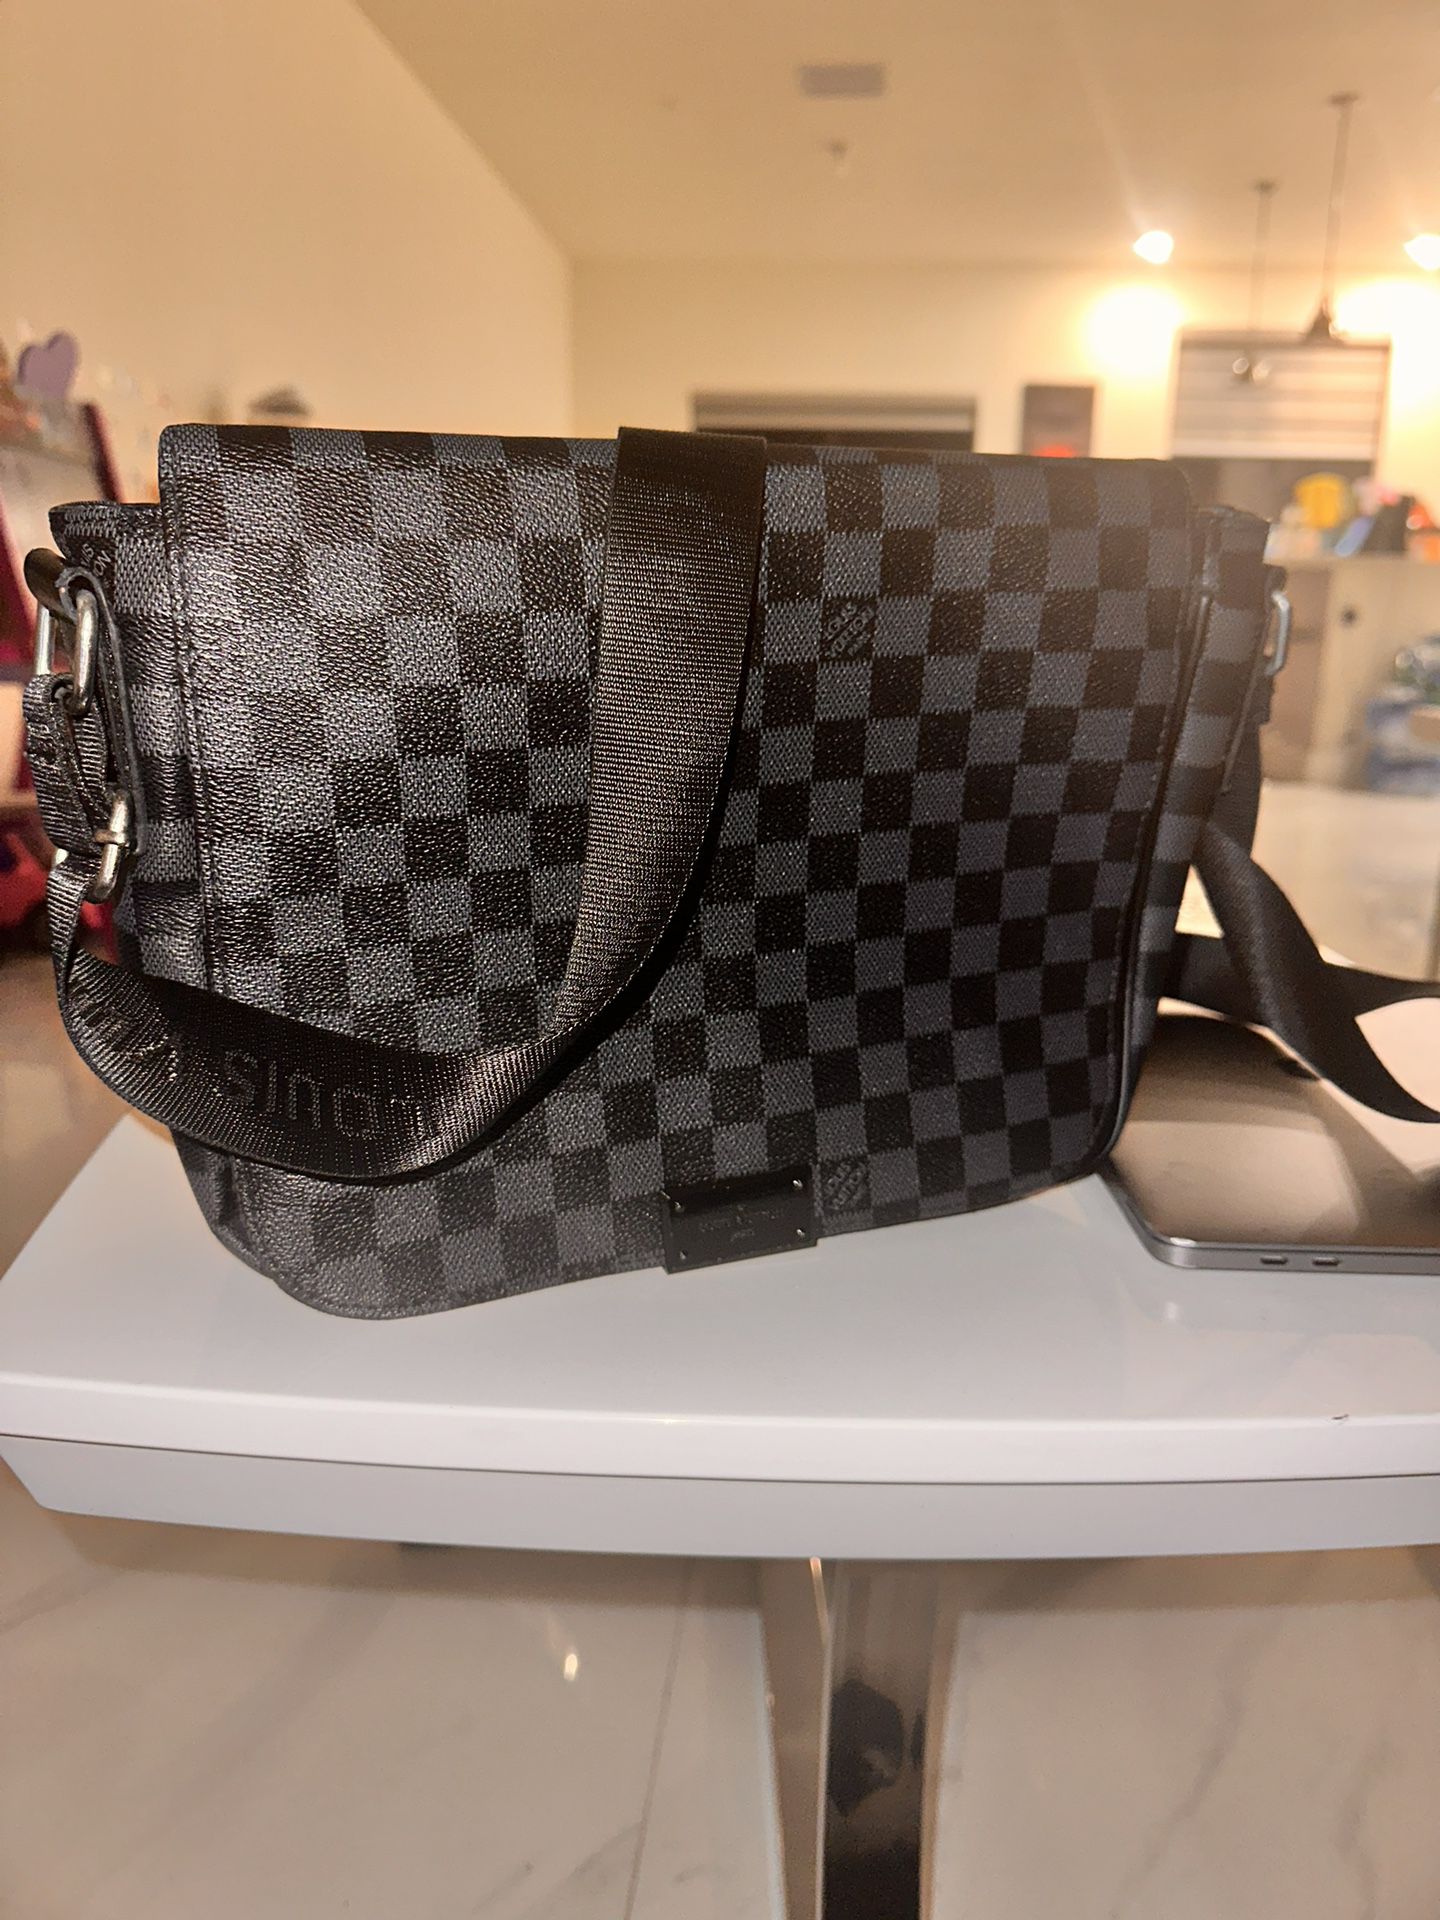 Louis Vuitton Bag With A Strap for Sale in Medley, FL - OfferUp